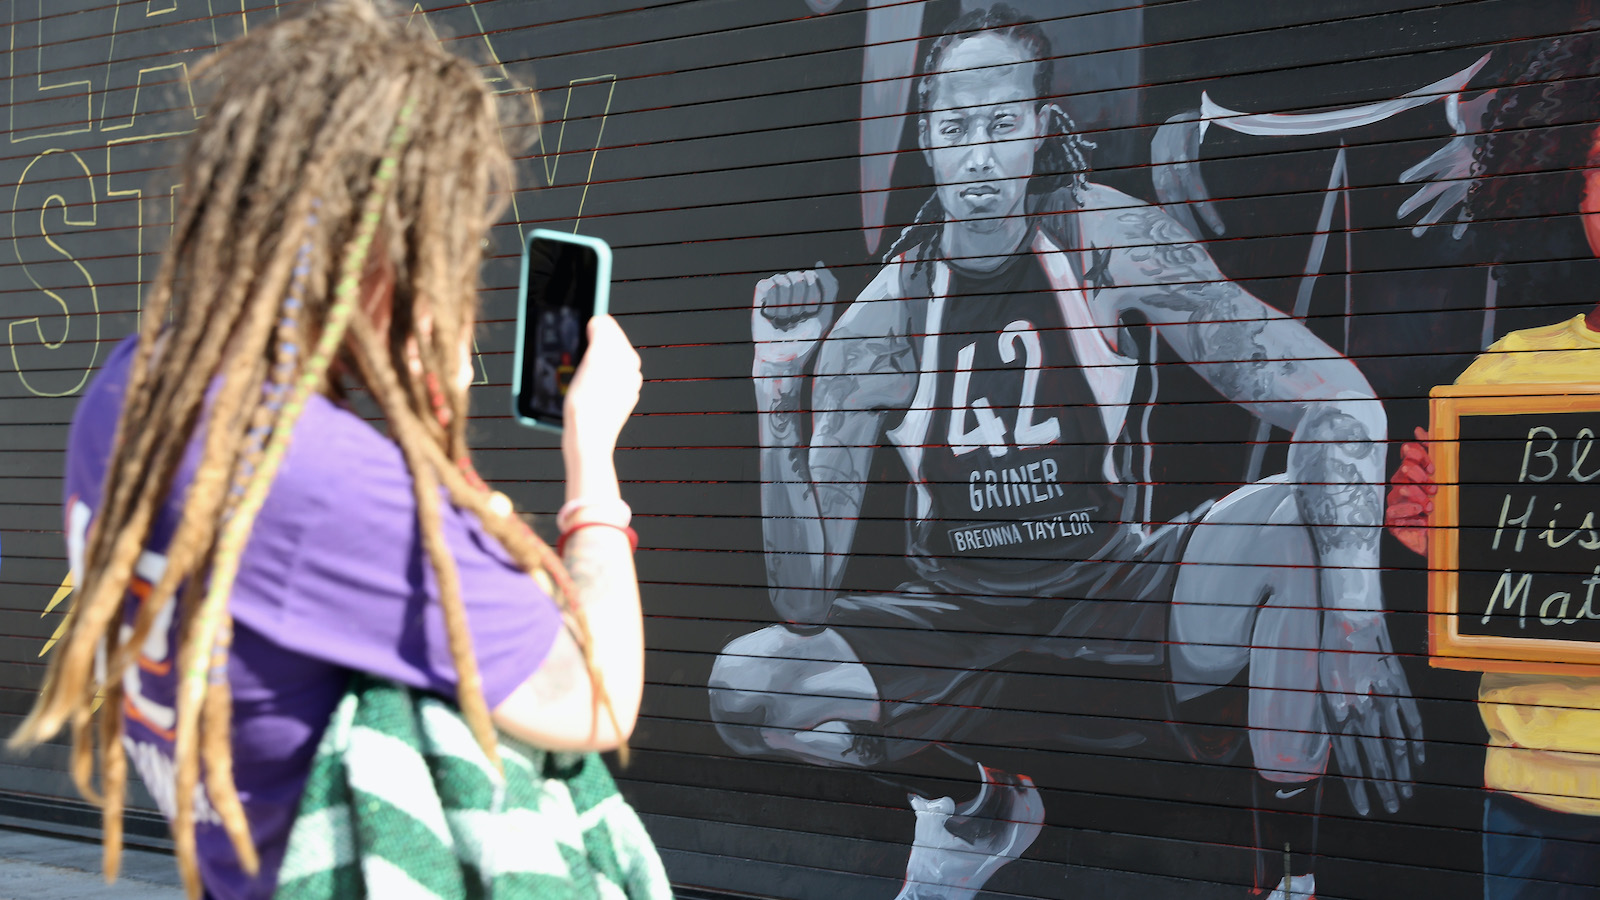 Phoenix Mercury fan Carley Givens takes a photo of a "Black Lives Matter" mural depicting Brittney Griner outside the Footprint Center 